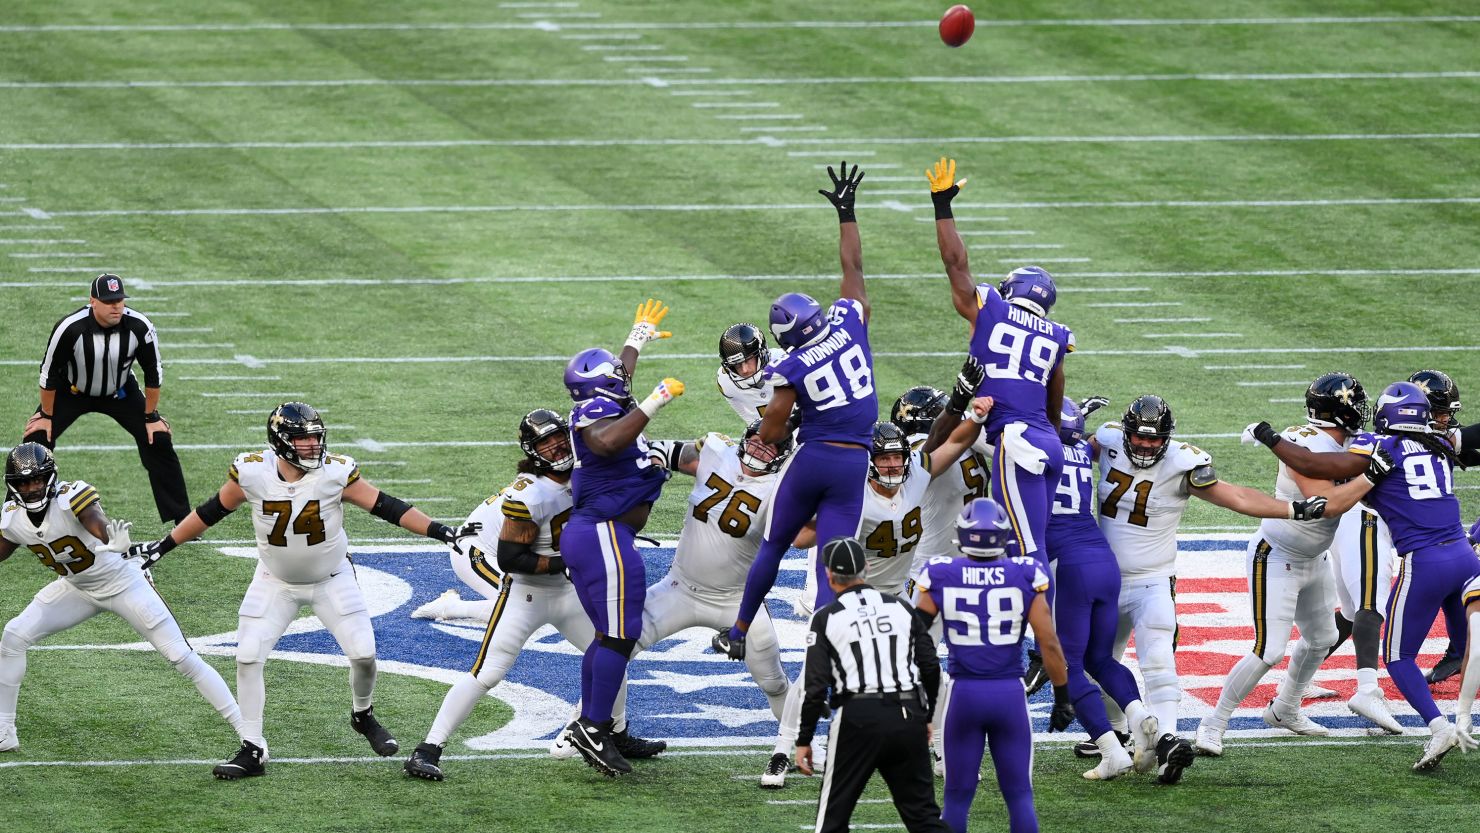 Wil Lutz misses a 61-yard field goal in the fourth quarter during the NFL match between Minnesota Vikings and New Orleans Saints at Tottenham Hotspur Stadium on October 2, 2022.